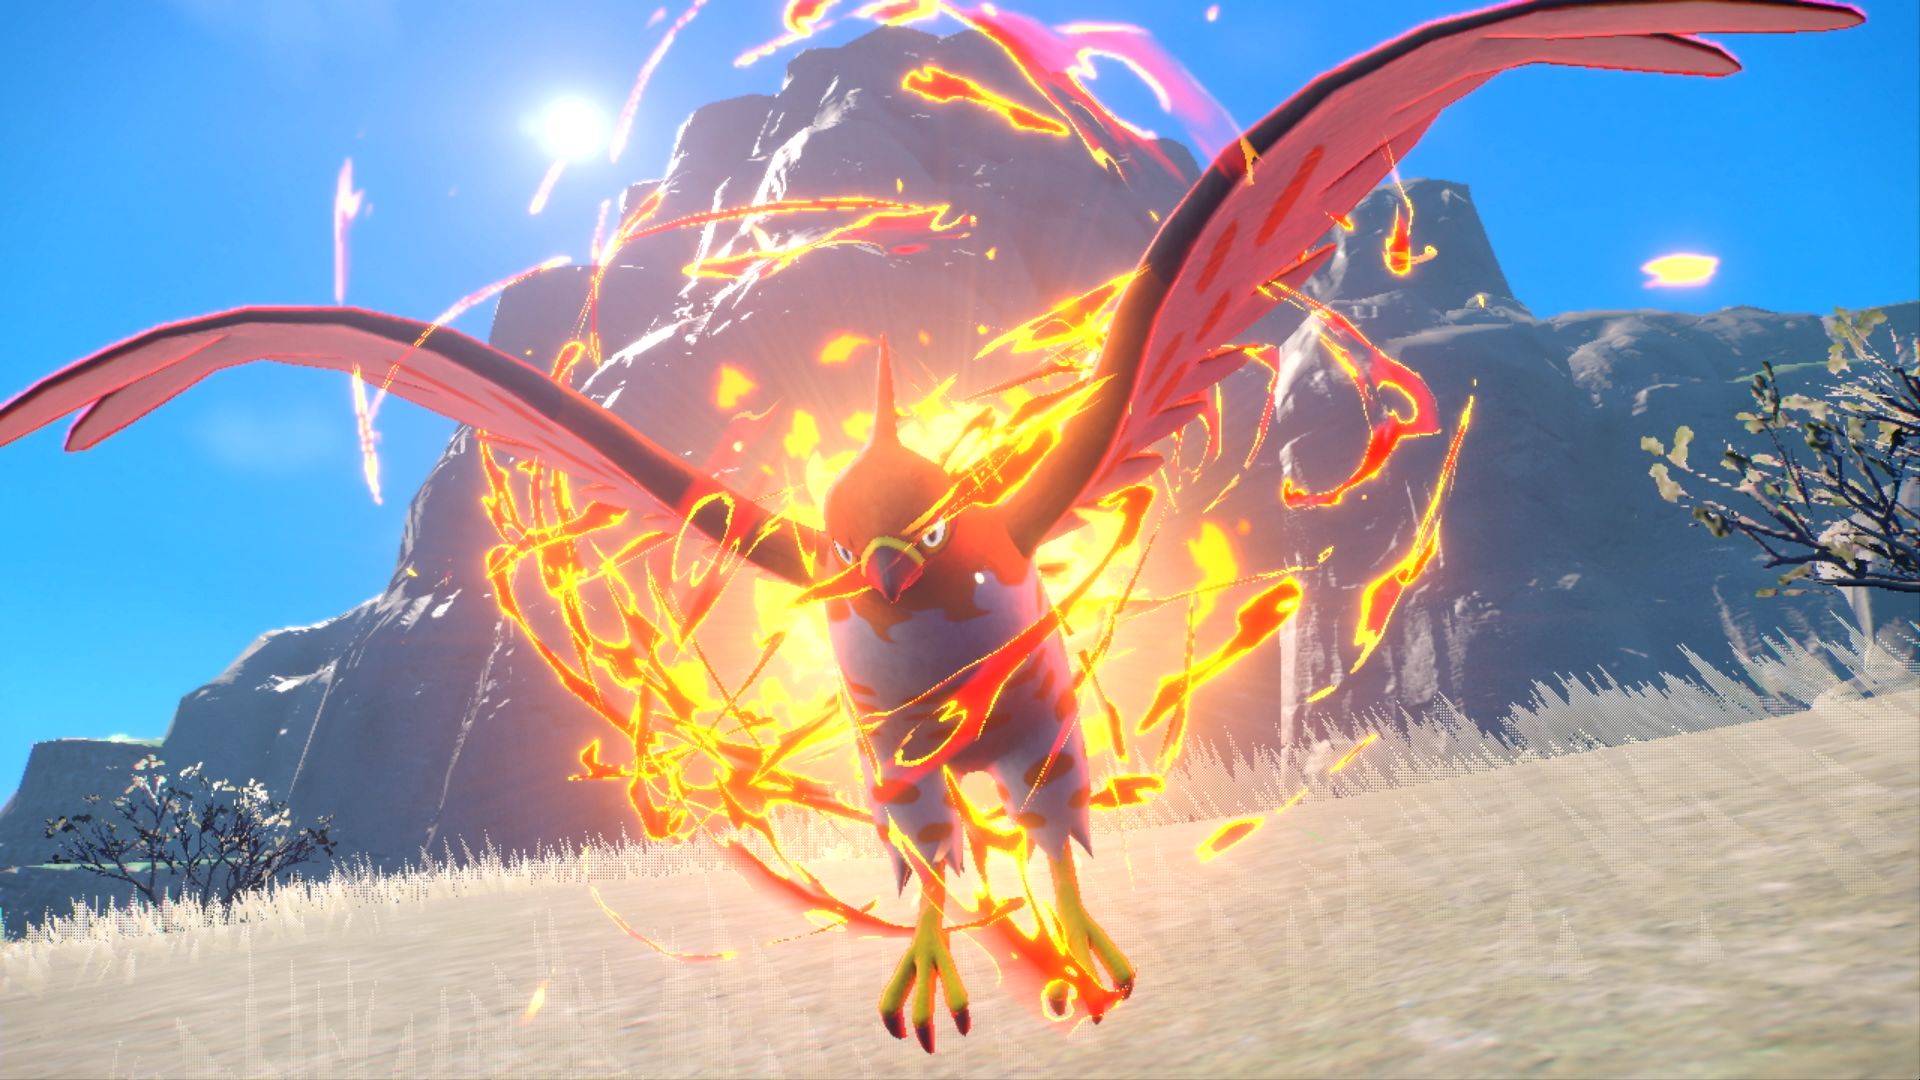 Talonflame using an attack